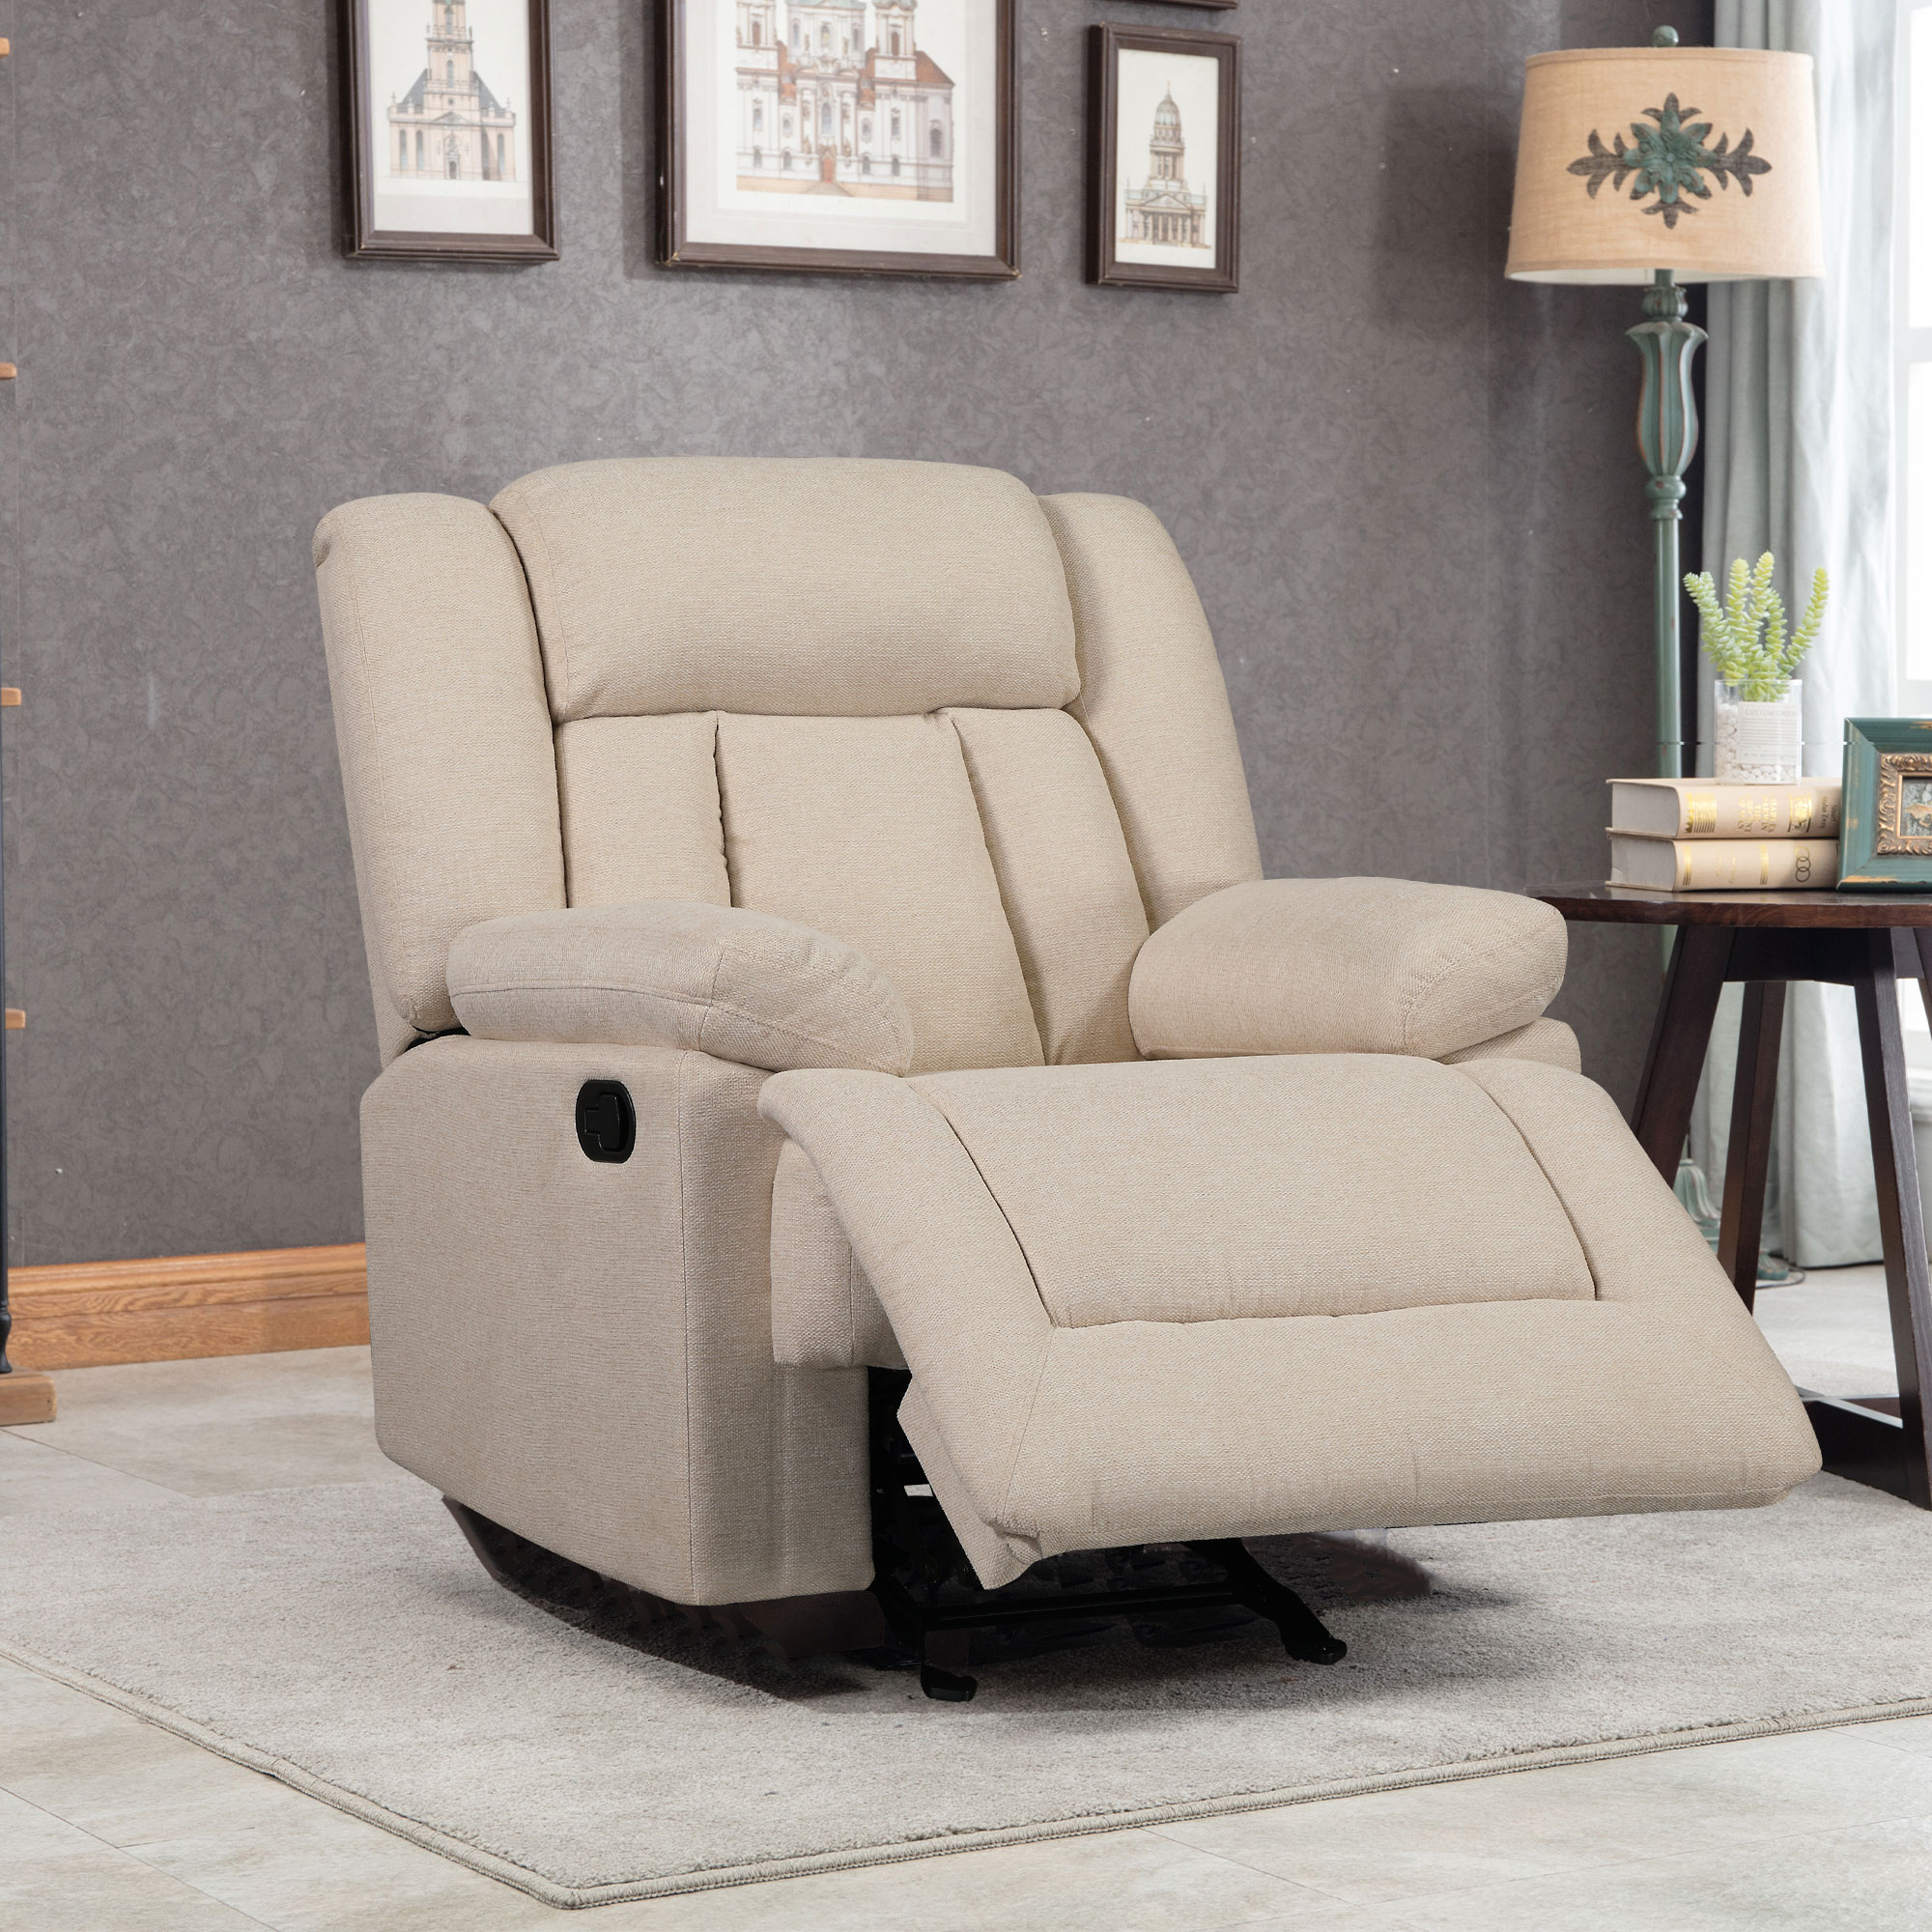 Welike Beige Fabric Recliner Chair Adjustable Home Theater Single Recliner Thick Seat and Backrest, Rocking Sofa for Living Room-Boyel Living